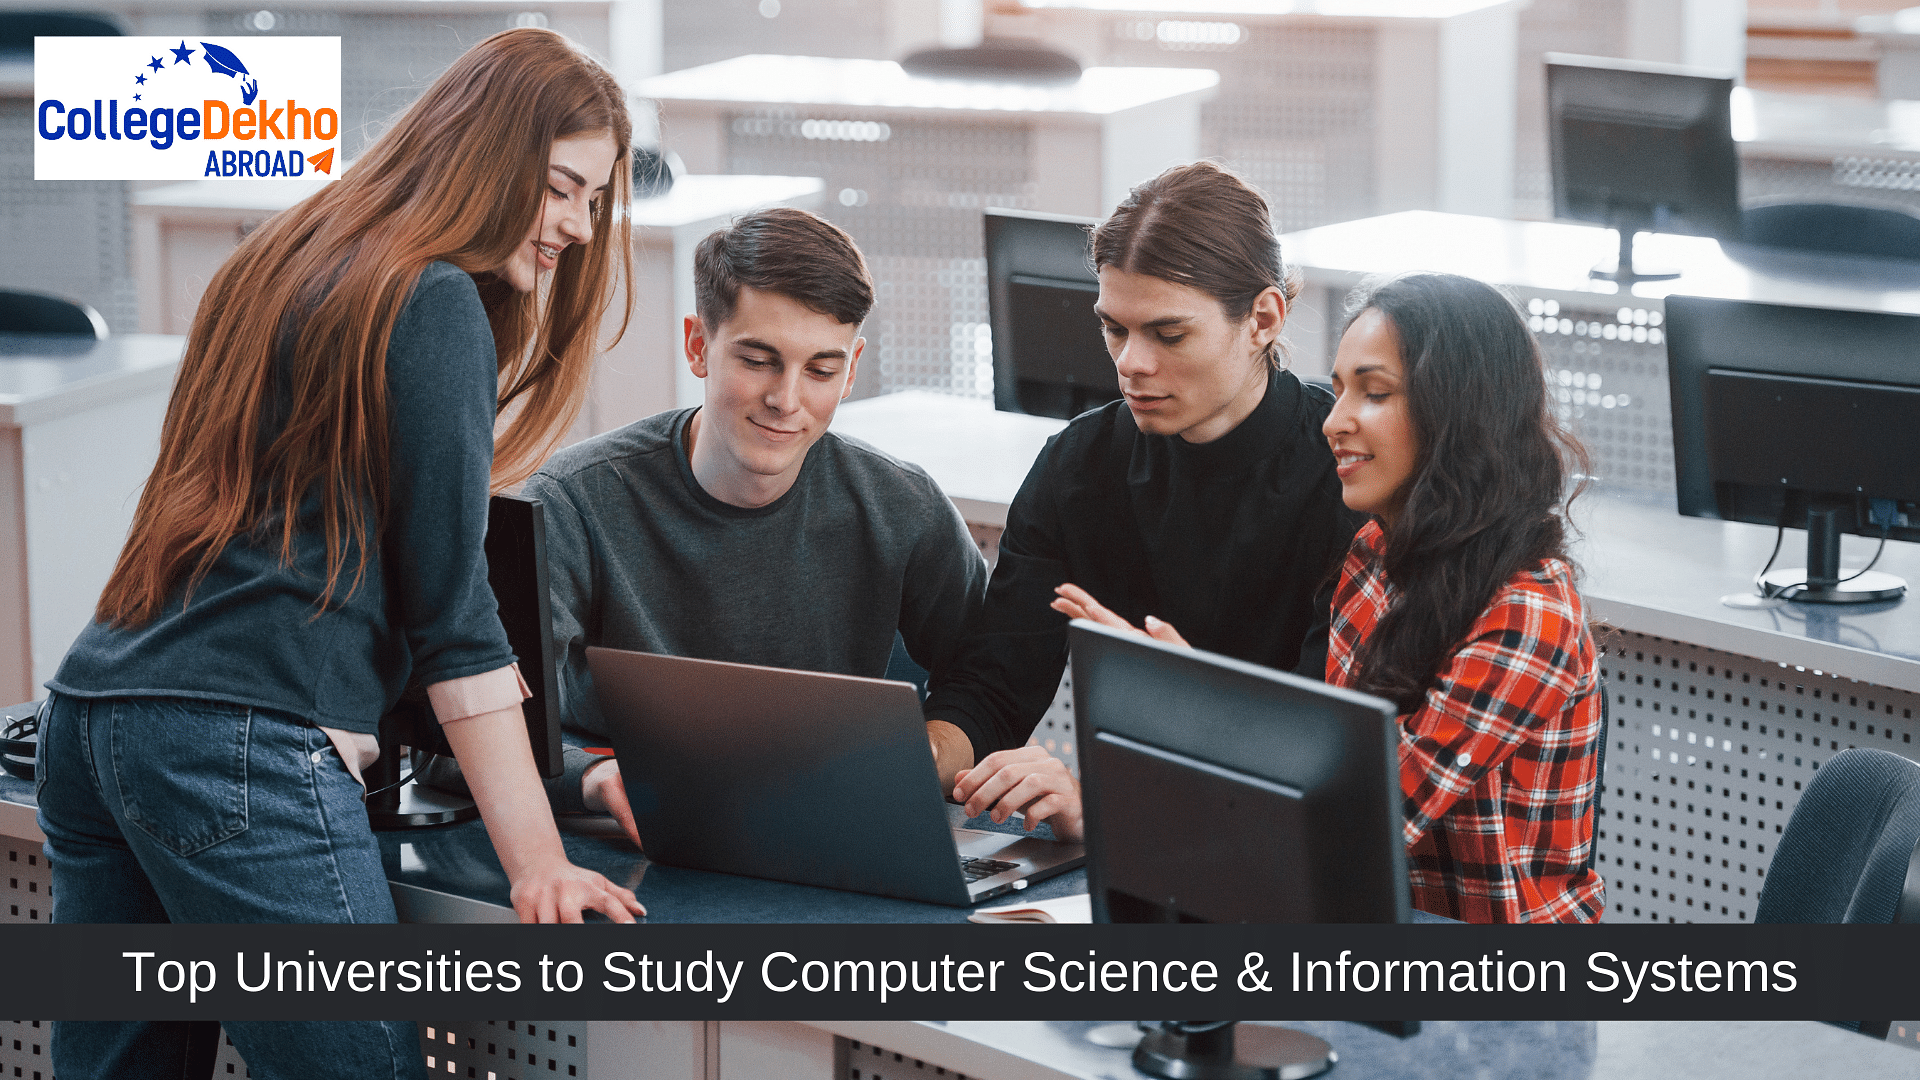 Top Global Universities for Computer Science & Information Systems